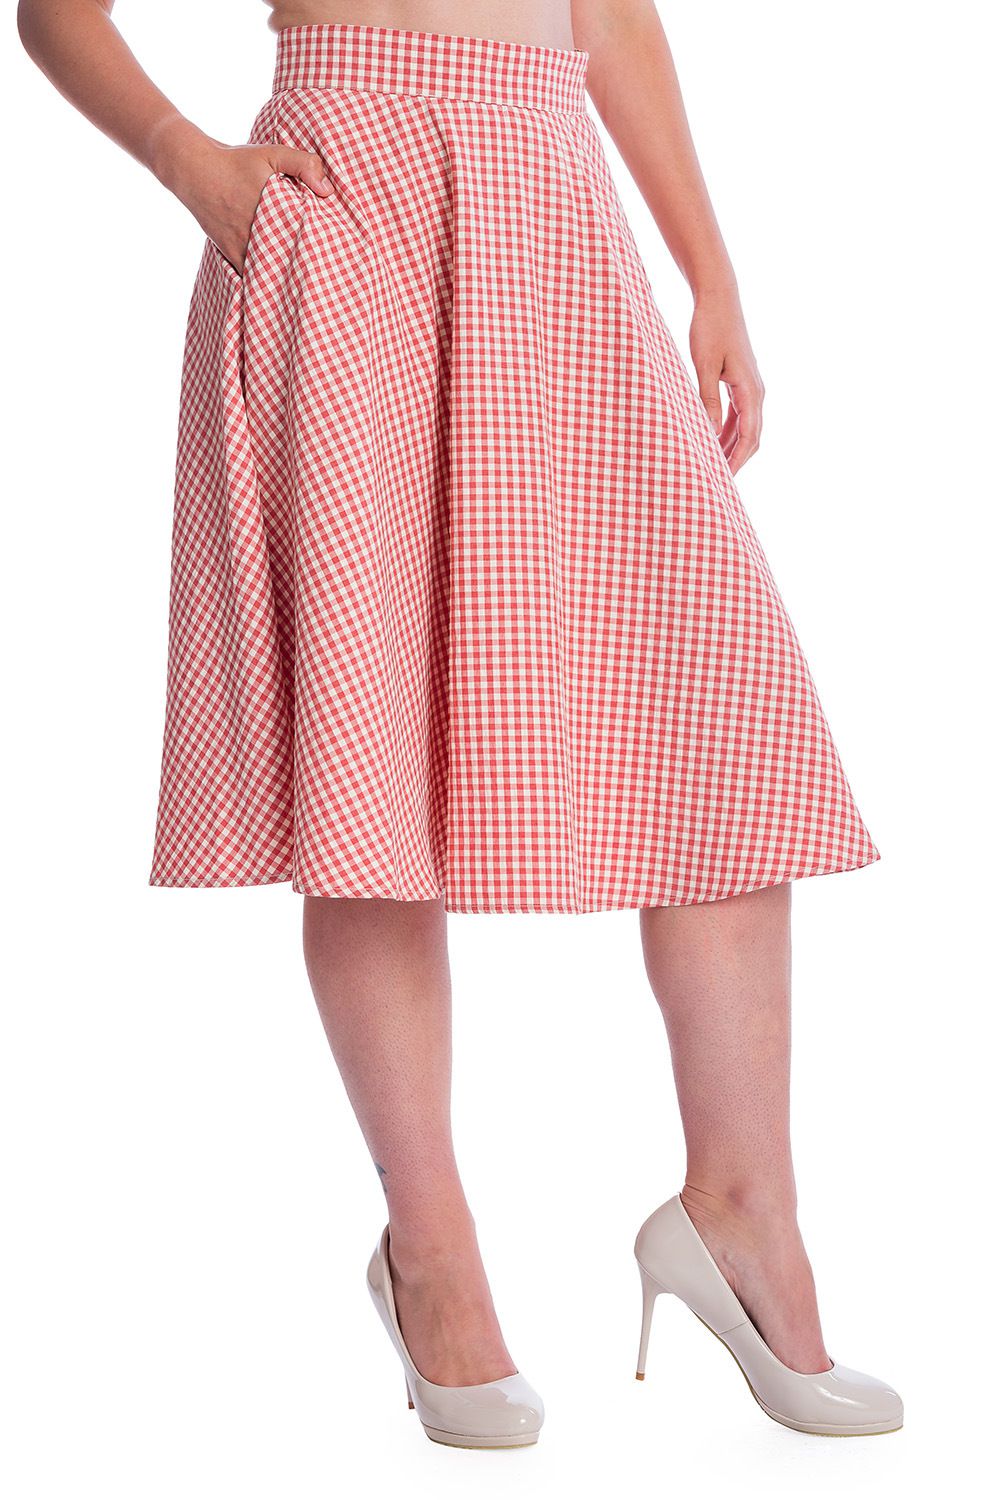 BNSK25342b_jupe-retro-pinup-50-s-rockabilly-banned-gingham-picnic